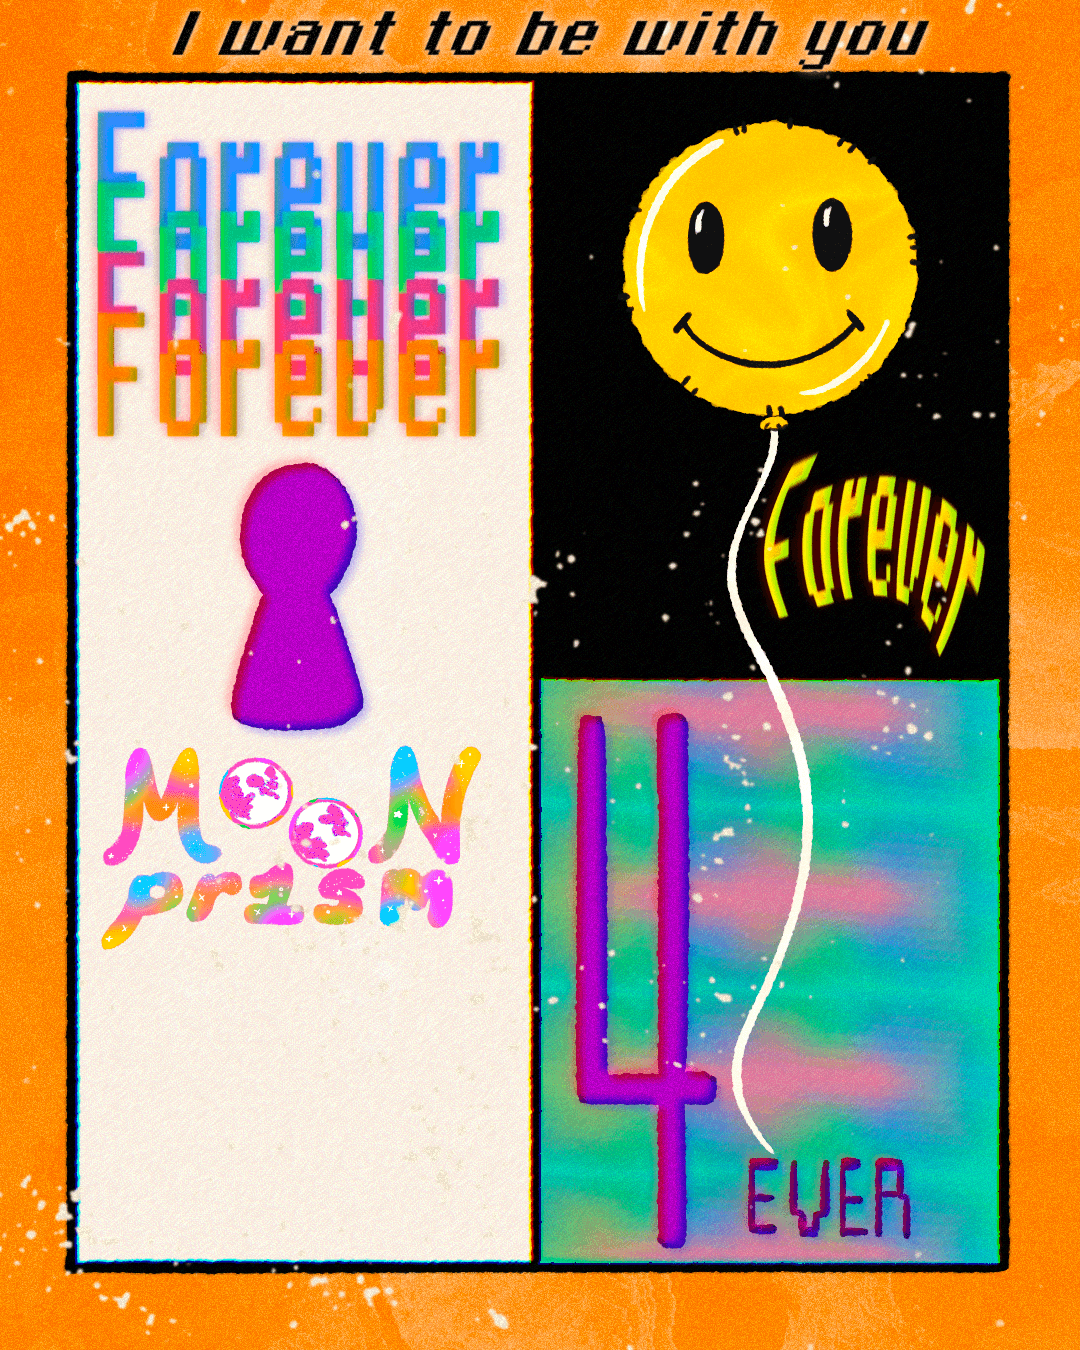 Illustration of a flyer that says 'I want to be with you forever' with the word 'forever' stylized different ways on a colorful background. There is a yellow smiley face balloon, a purple keyhole, a glitchy looking teal and pink square, all on an orange and cream background.